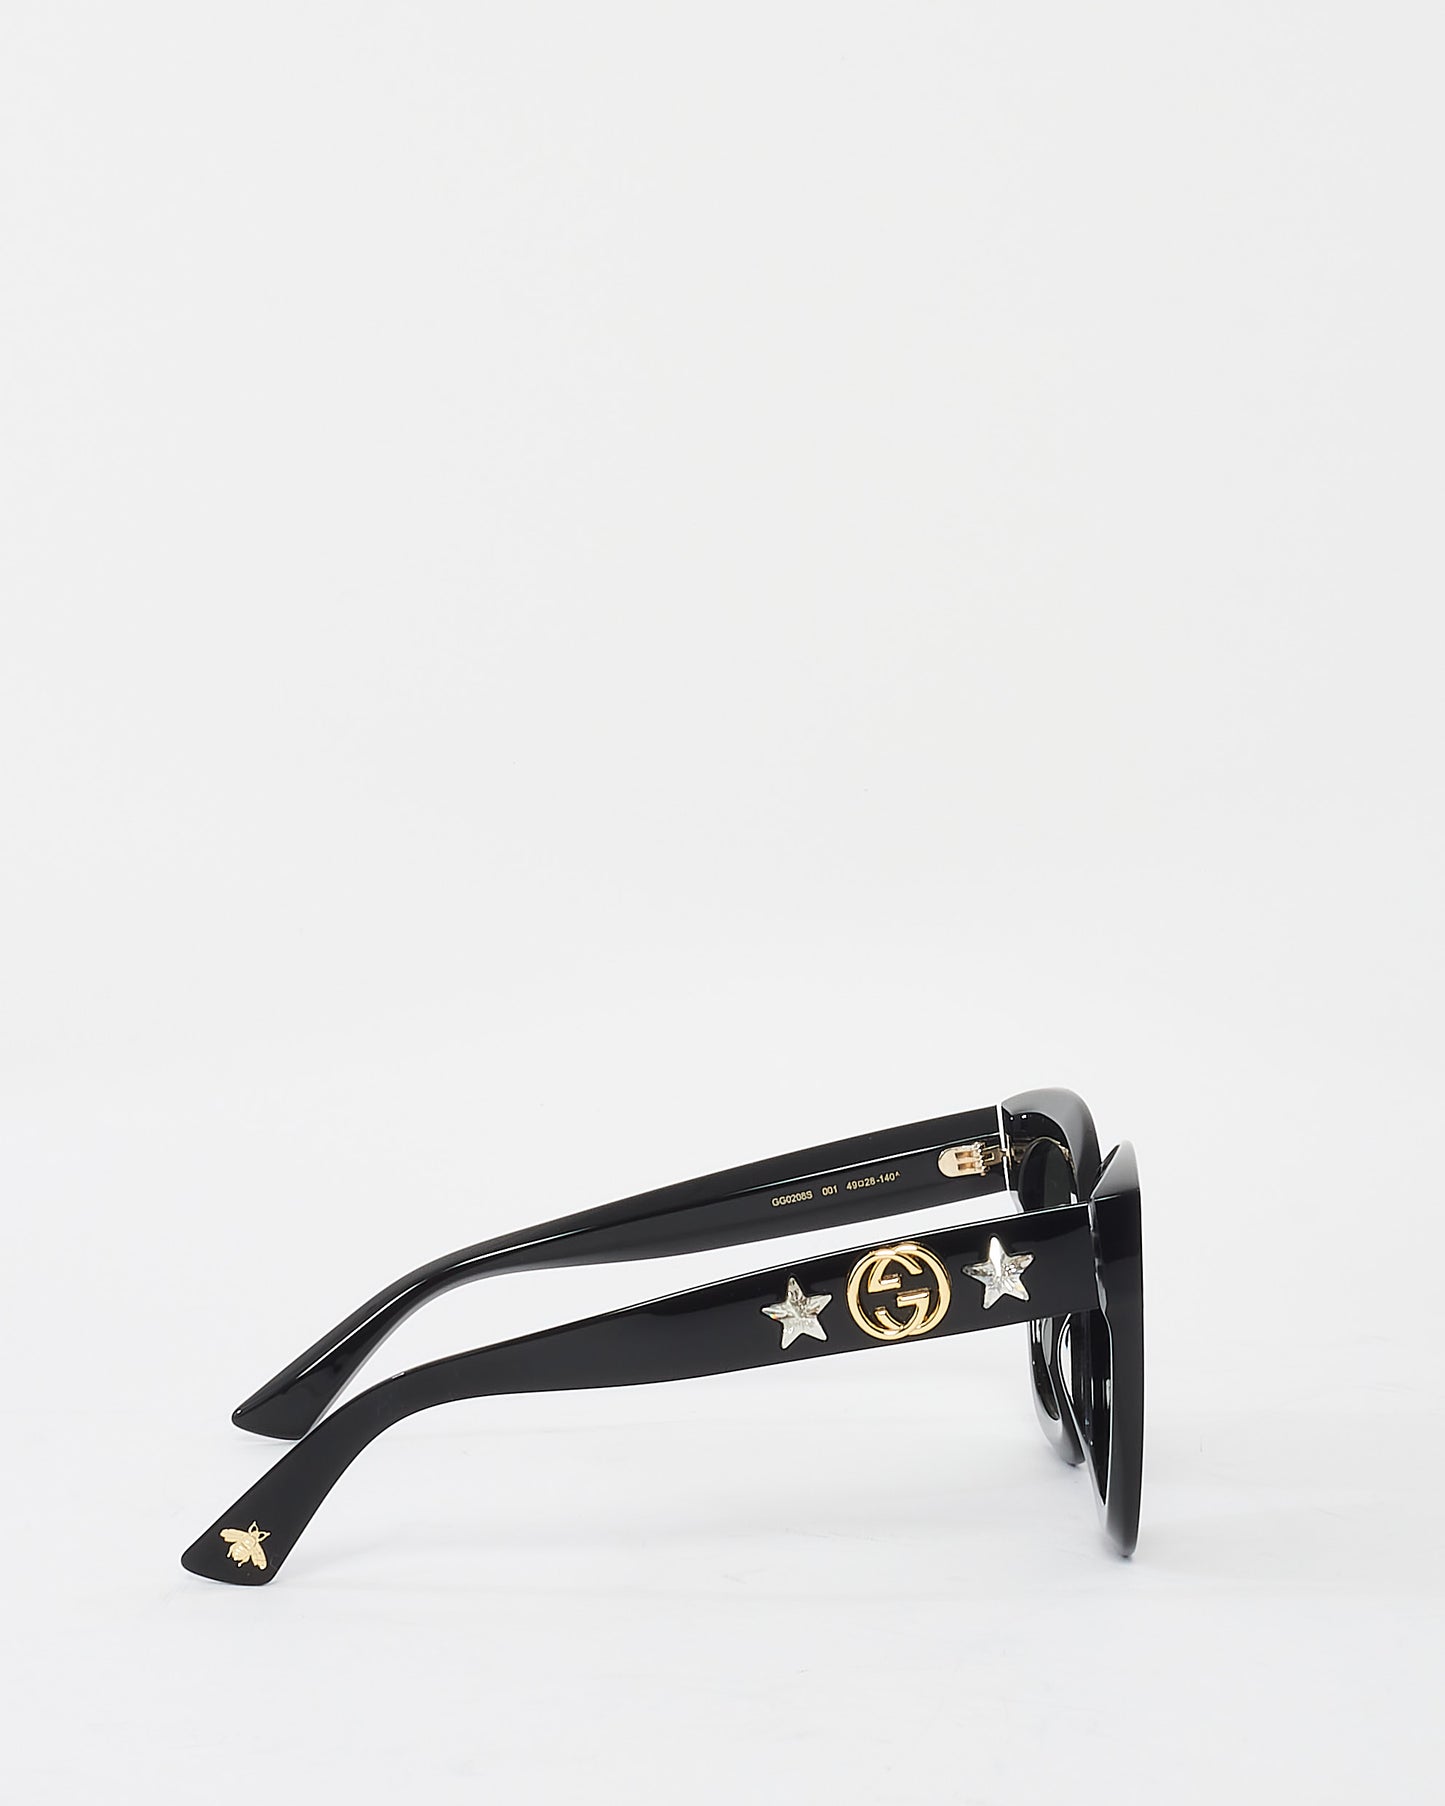 Gucci Black Acetate Oversized Crytal Star Sunglasses GG0208S